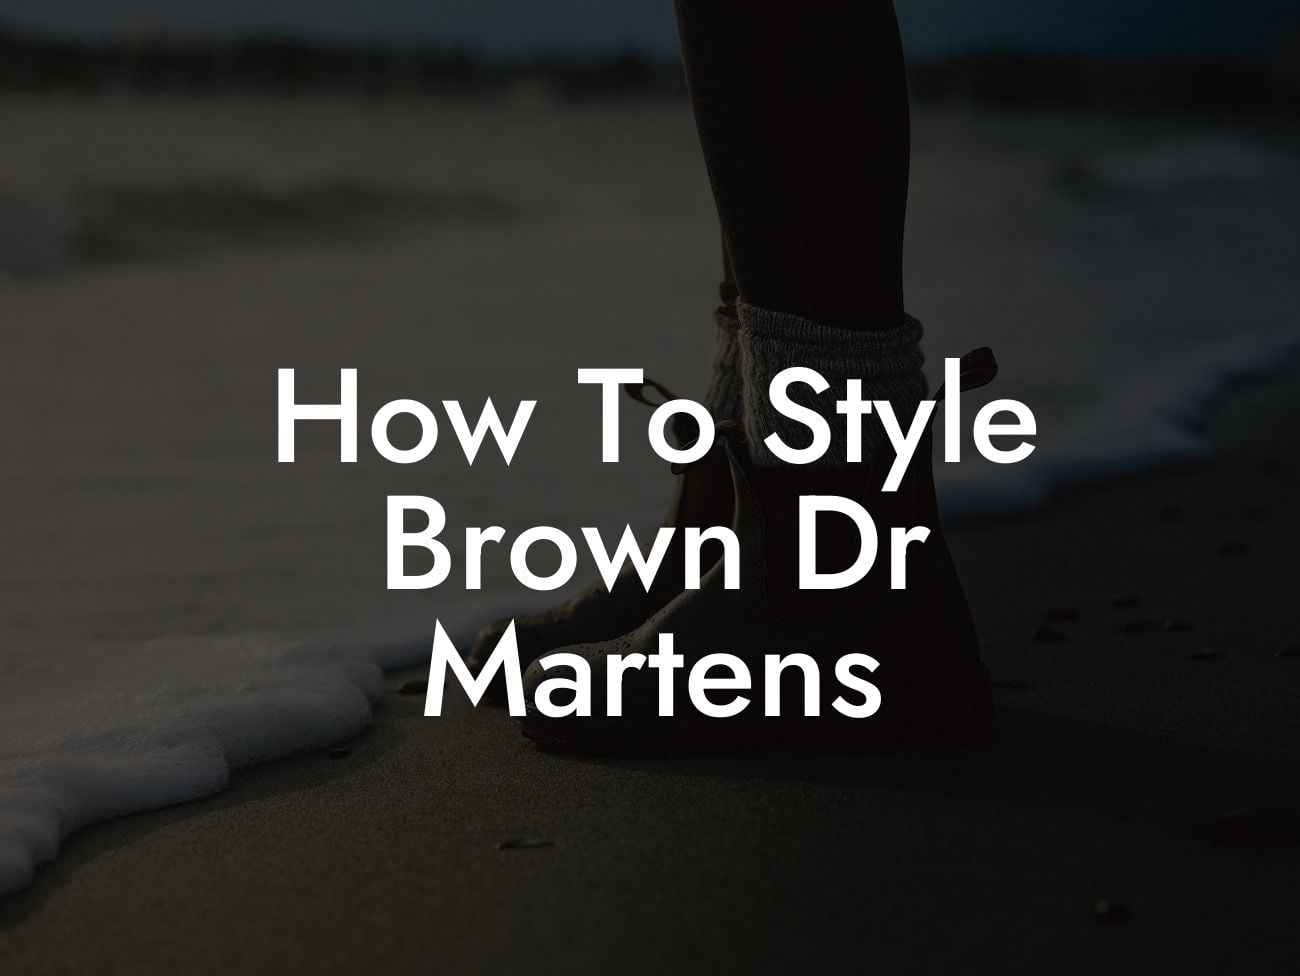 How To Style Brown Dr Martens